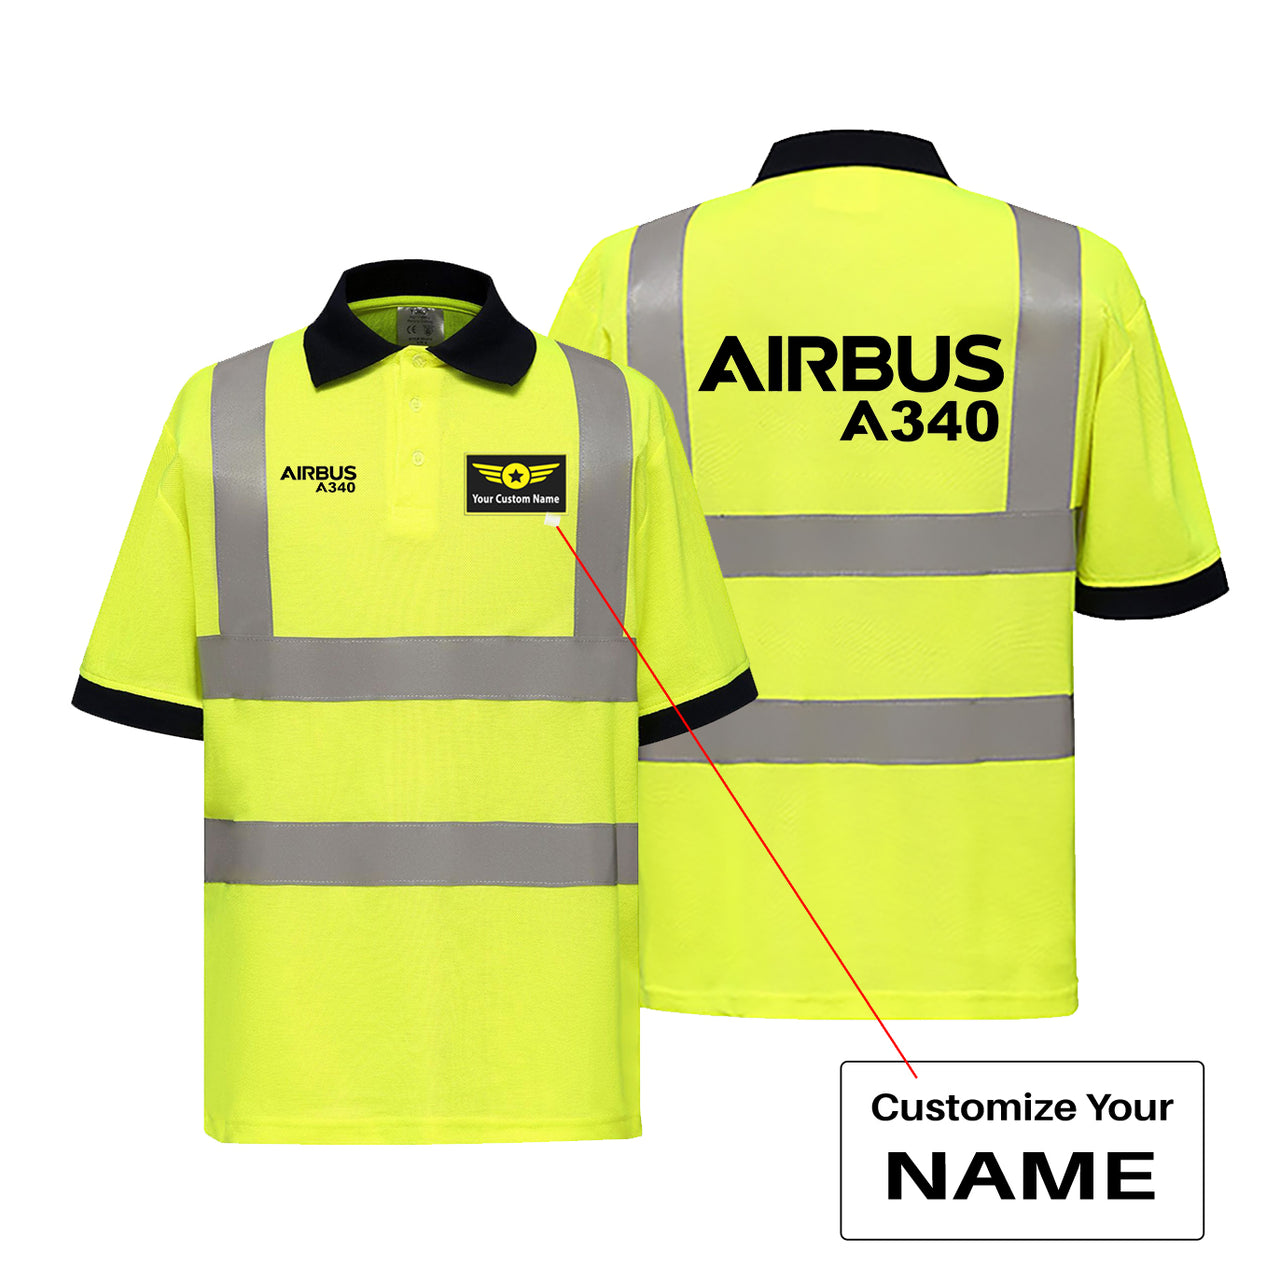 Airbus A340 & Text Designed Reflective Polo T-Shirts